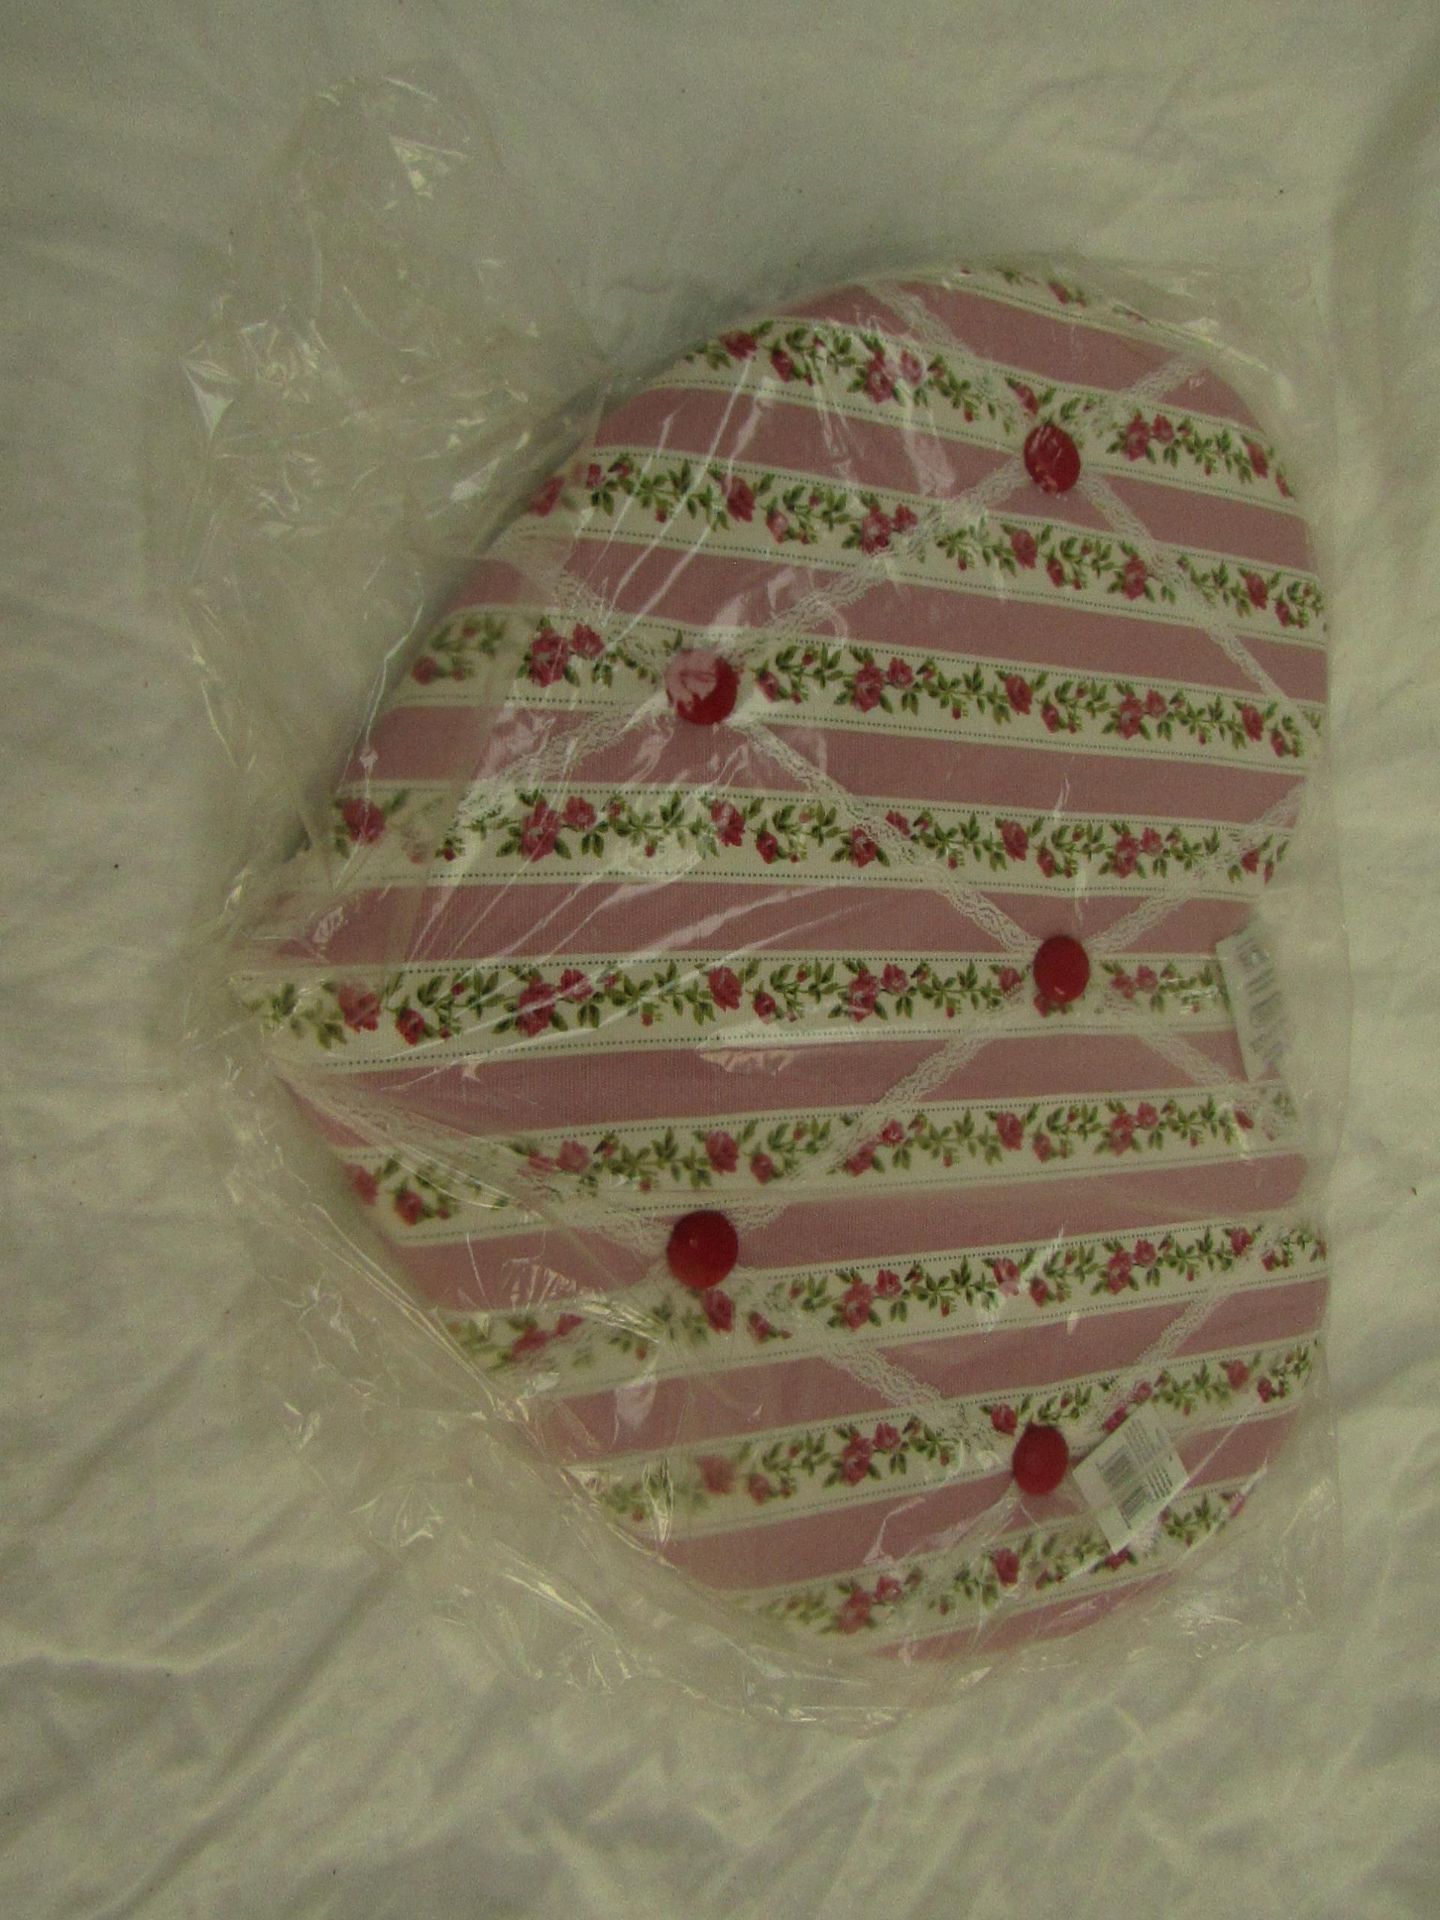 Candlelight - Pink Floral Heart Shaped Fabric Memo Board - New & Packaged.